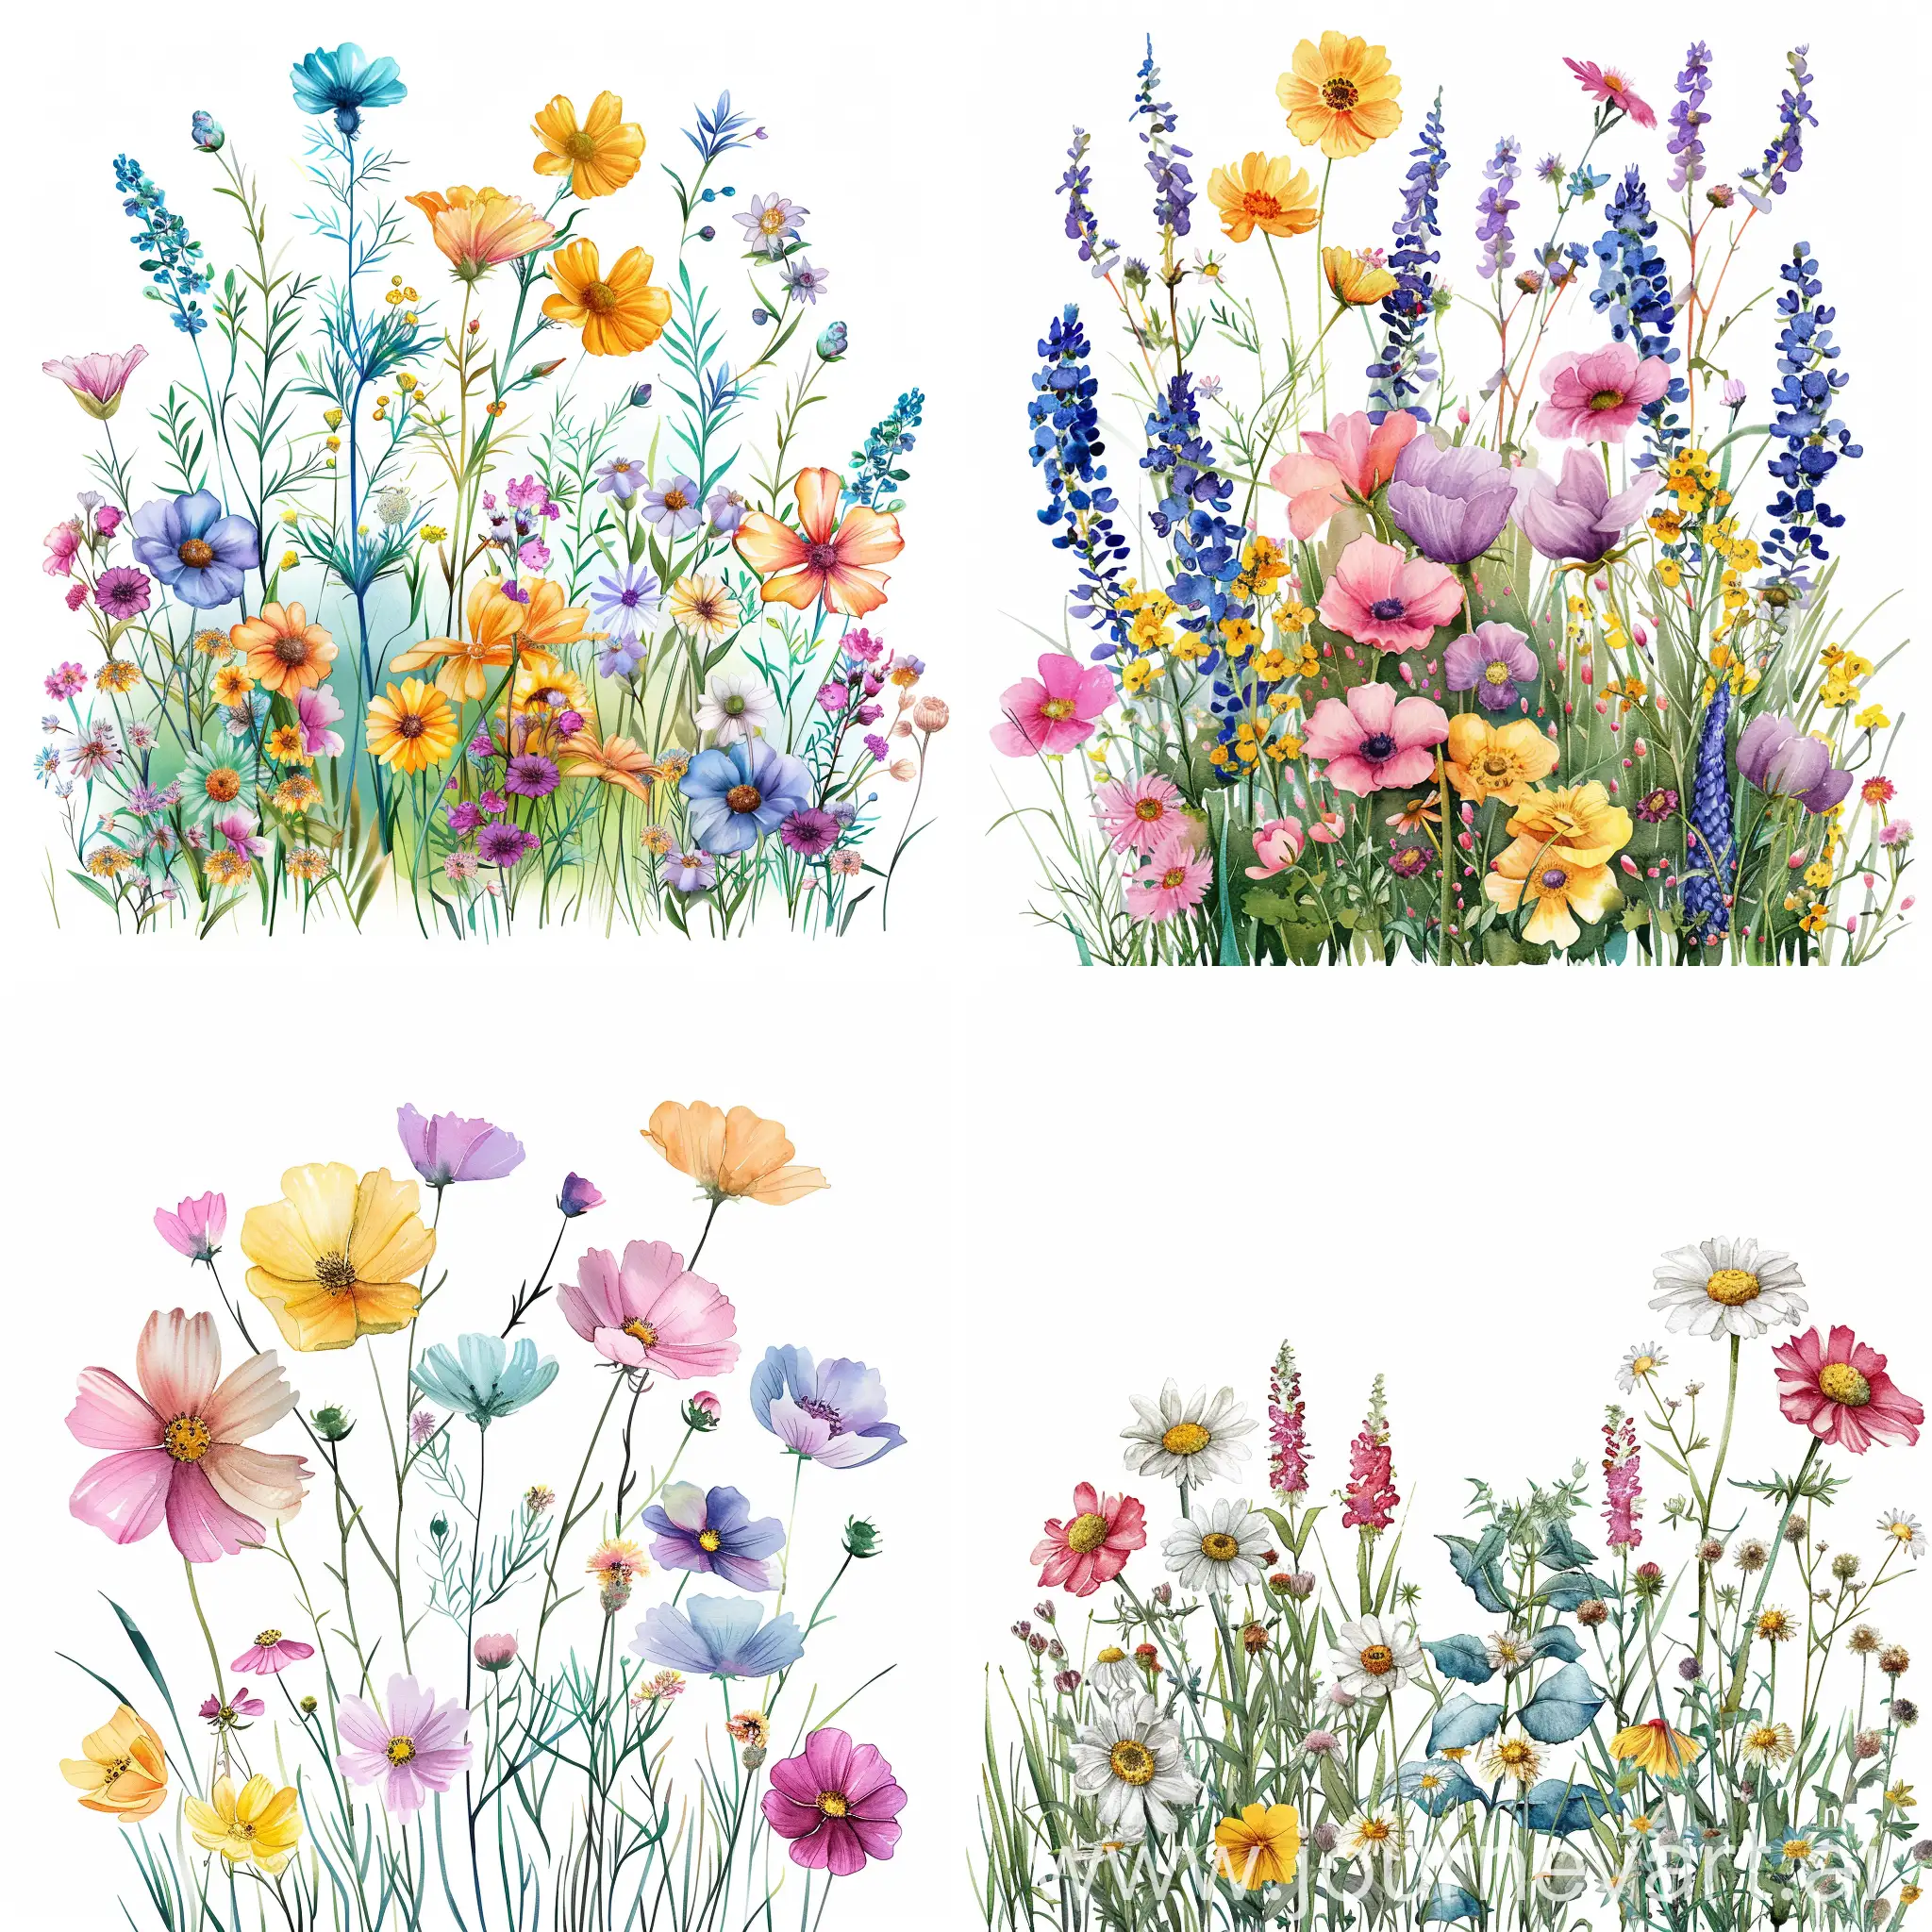 Vibrant-Watercolor-Meadow-Flowers-on-White-Background